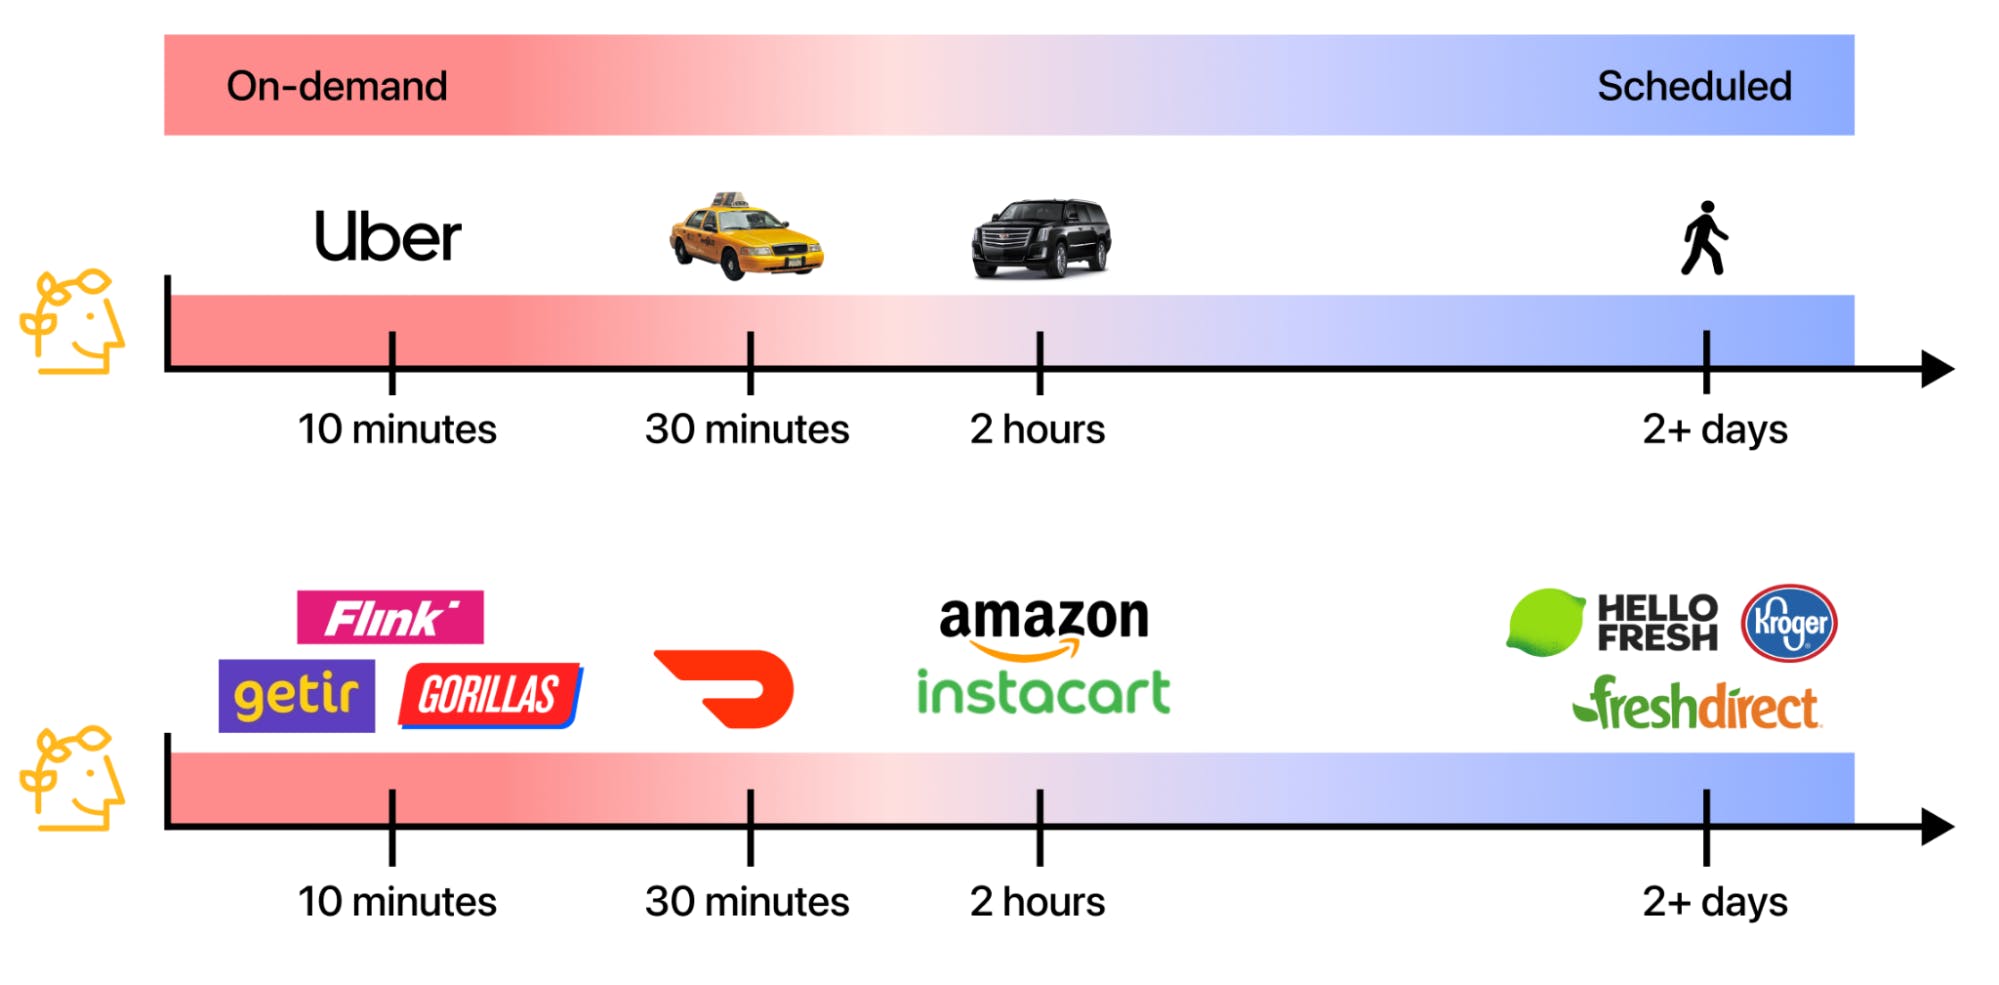 Gauging the impact/demand of an ultrafast grocery delivery option